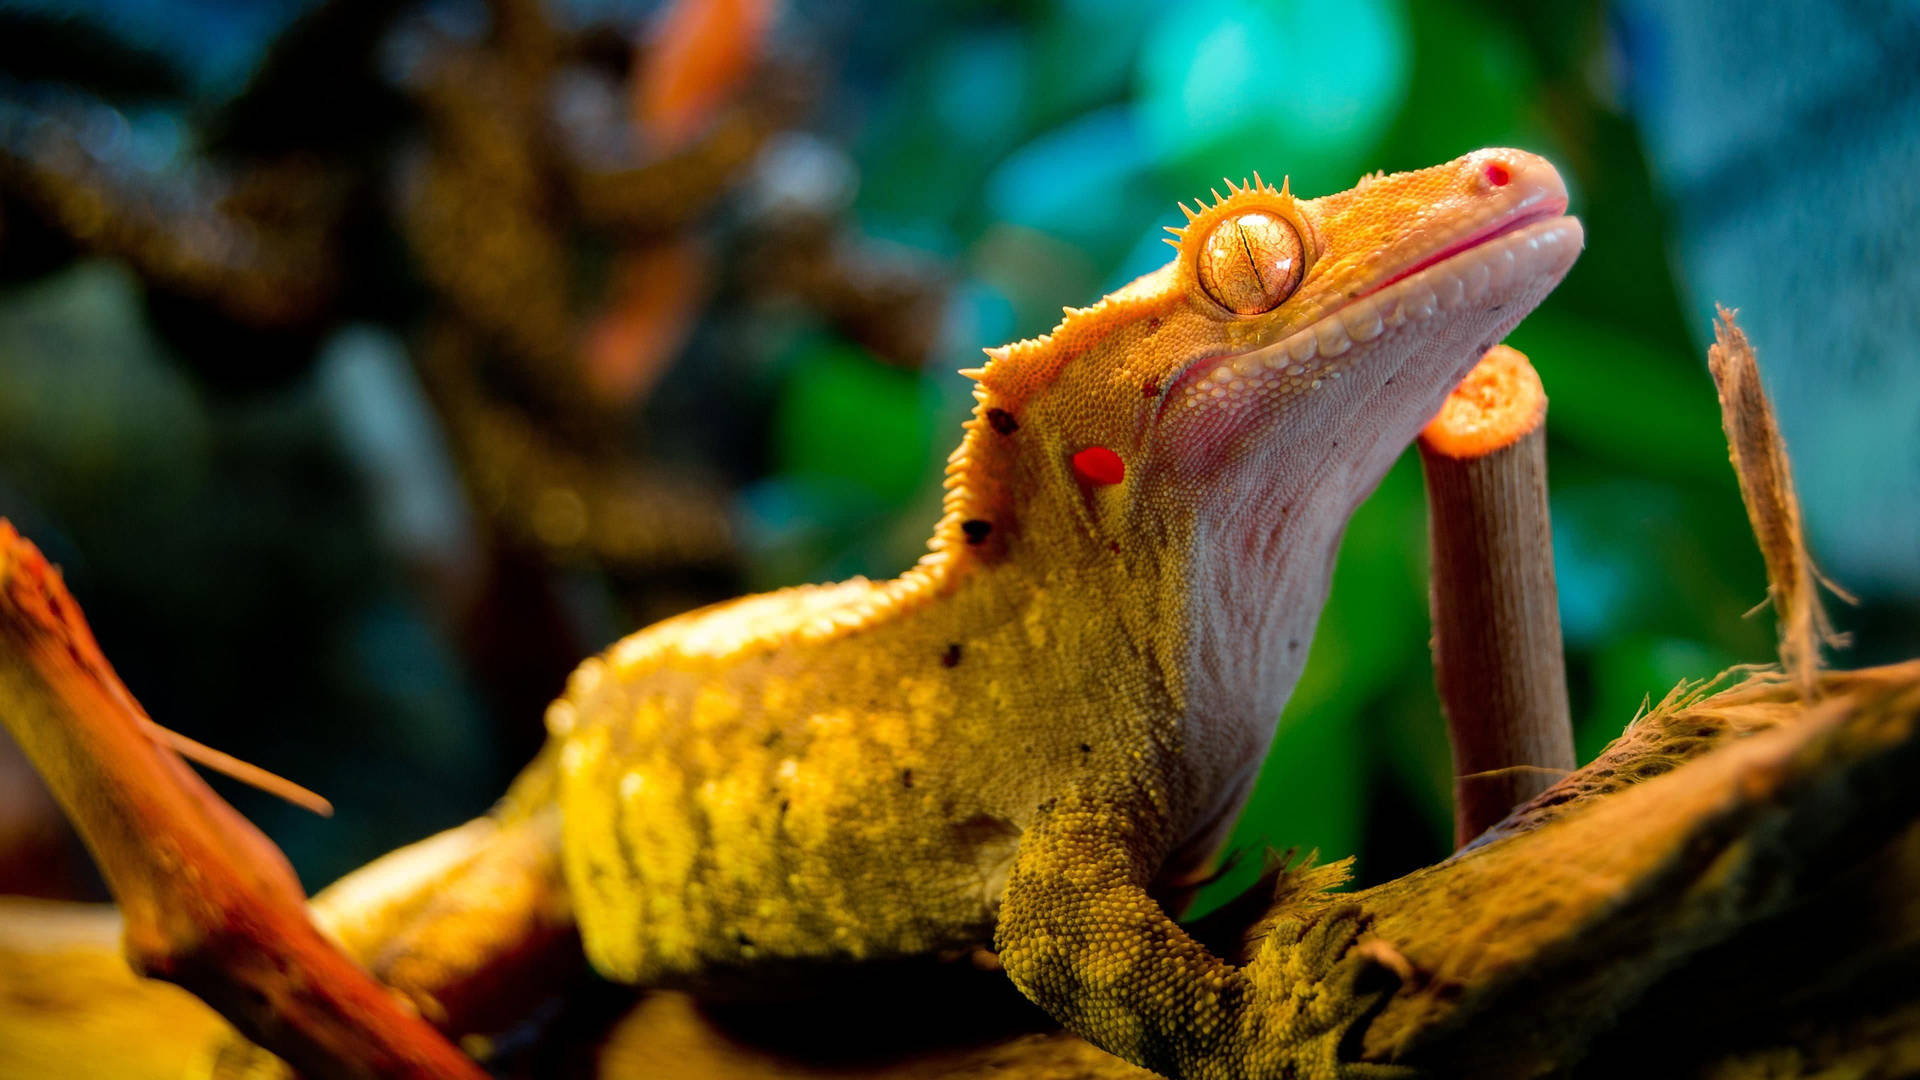 Exotic Yellow-crested Gecko Captured In Close-up